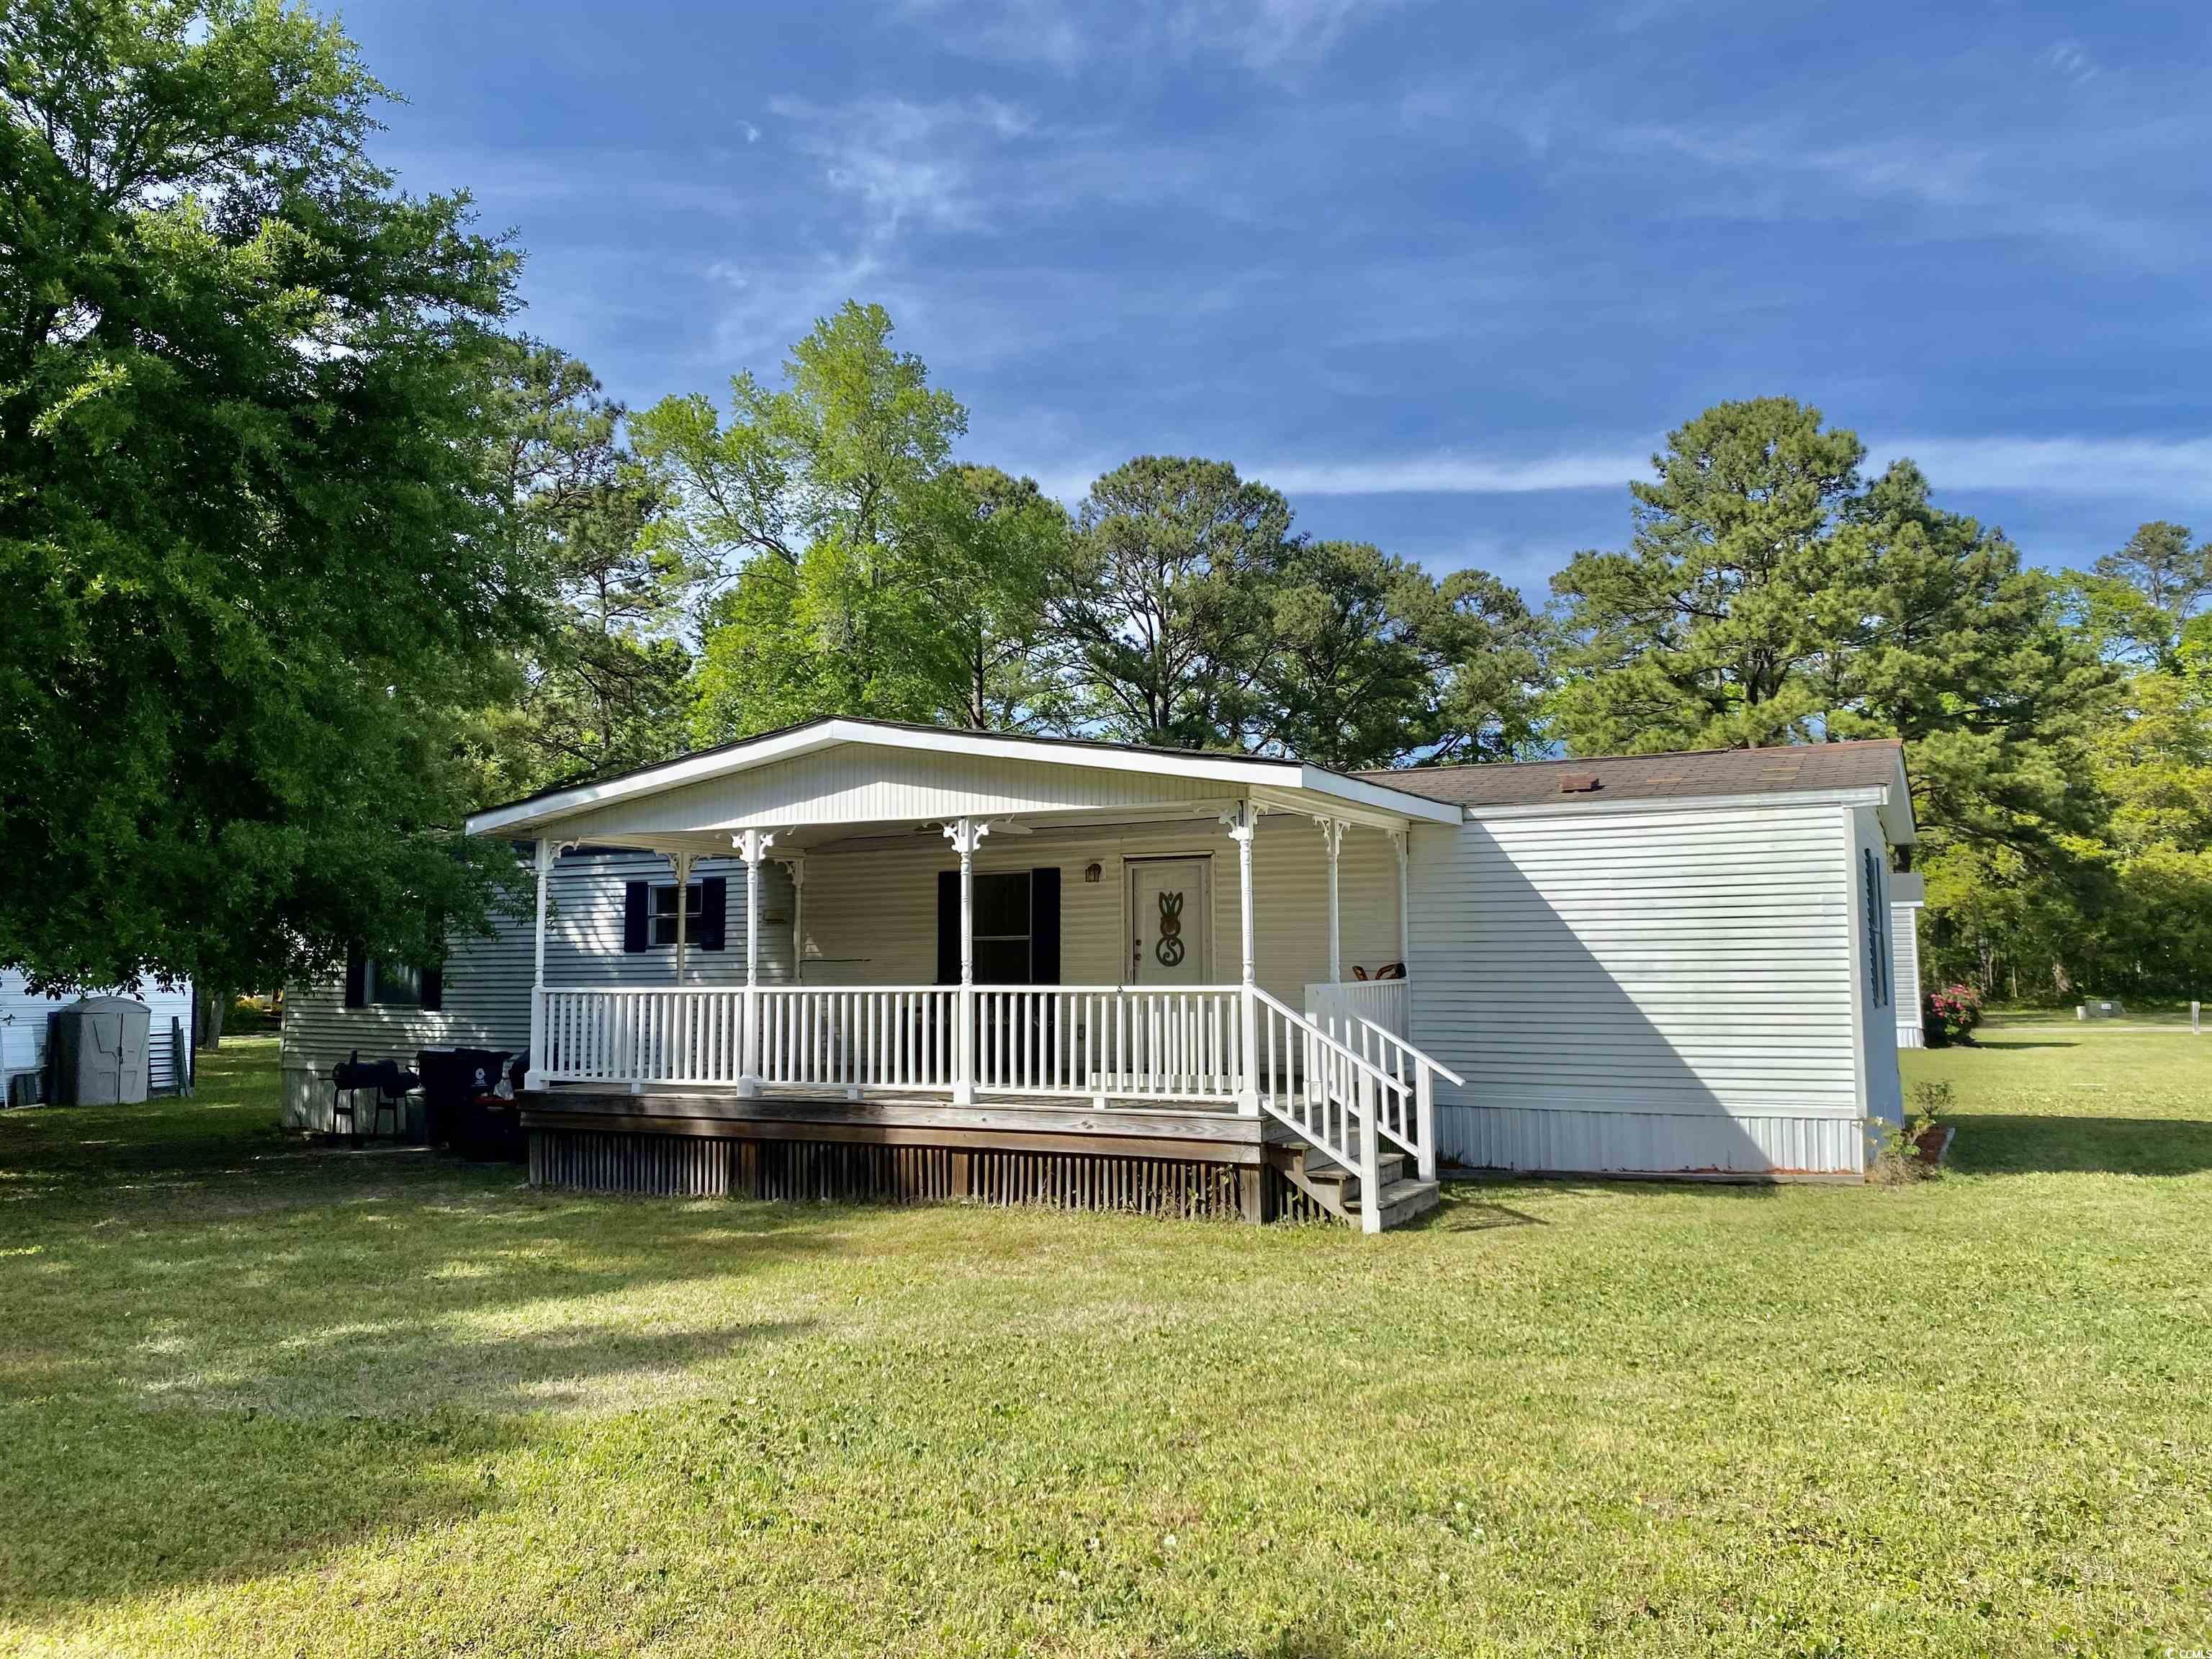 charming & well maintained 2bd/2ba manufactured home centrally located in the heart of beautiful murrells inlet, only minutes to beach, shopping and marsh walk. home is located on a large, spacious lot tucked away in a peaceful, upscale mobile home community. home features xl living area, vaulted ceilings, new laminate flooring throughout,2018 new hvac, 2023 new hot water tank, split floor plan, large porch on front of home as well as a back porch, carport for parking. relax under the shade of beautiful trees, nice outside storage unit conveys. no hoa here just the land lease! this home wont last long! call to schedule a showing today! welcome home!